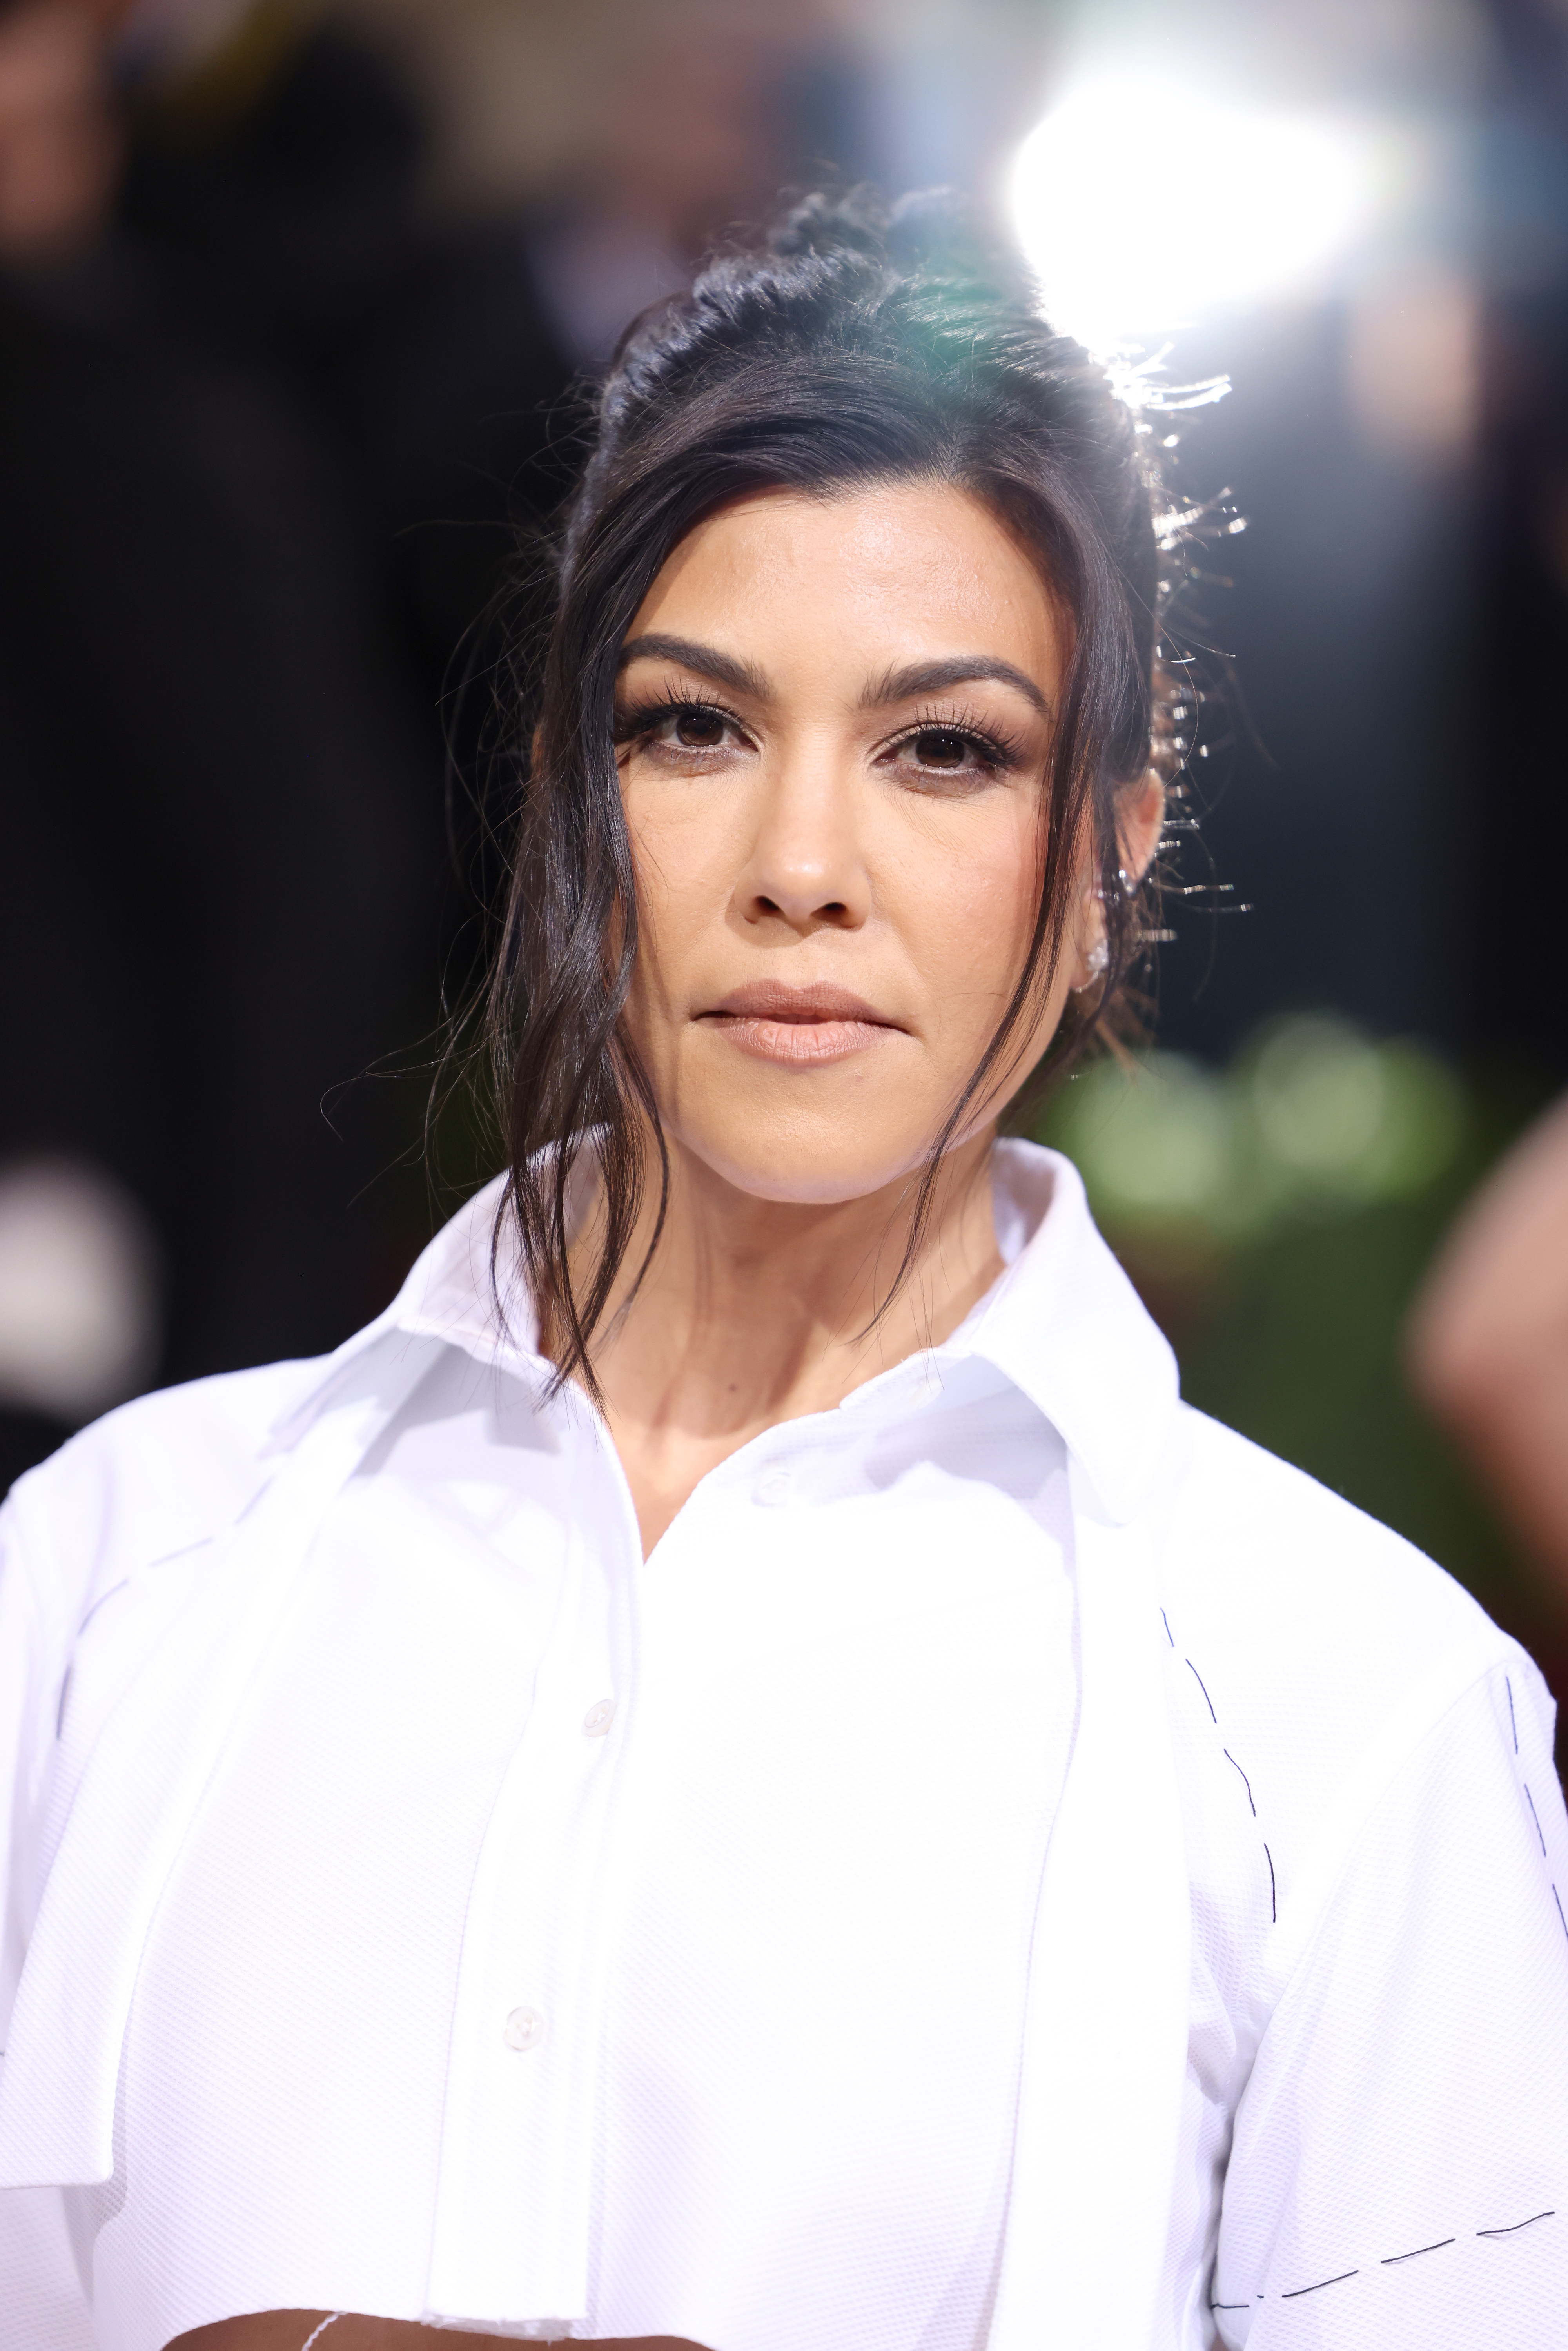 Kourtney Kardashian at a formal event, wearing an elegant dress shirt with her hair styled in an updo